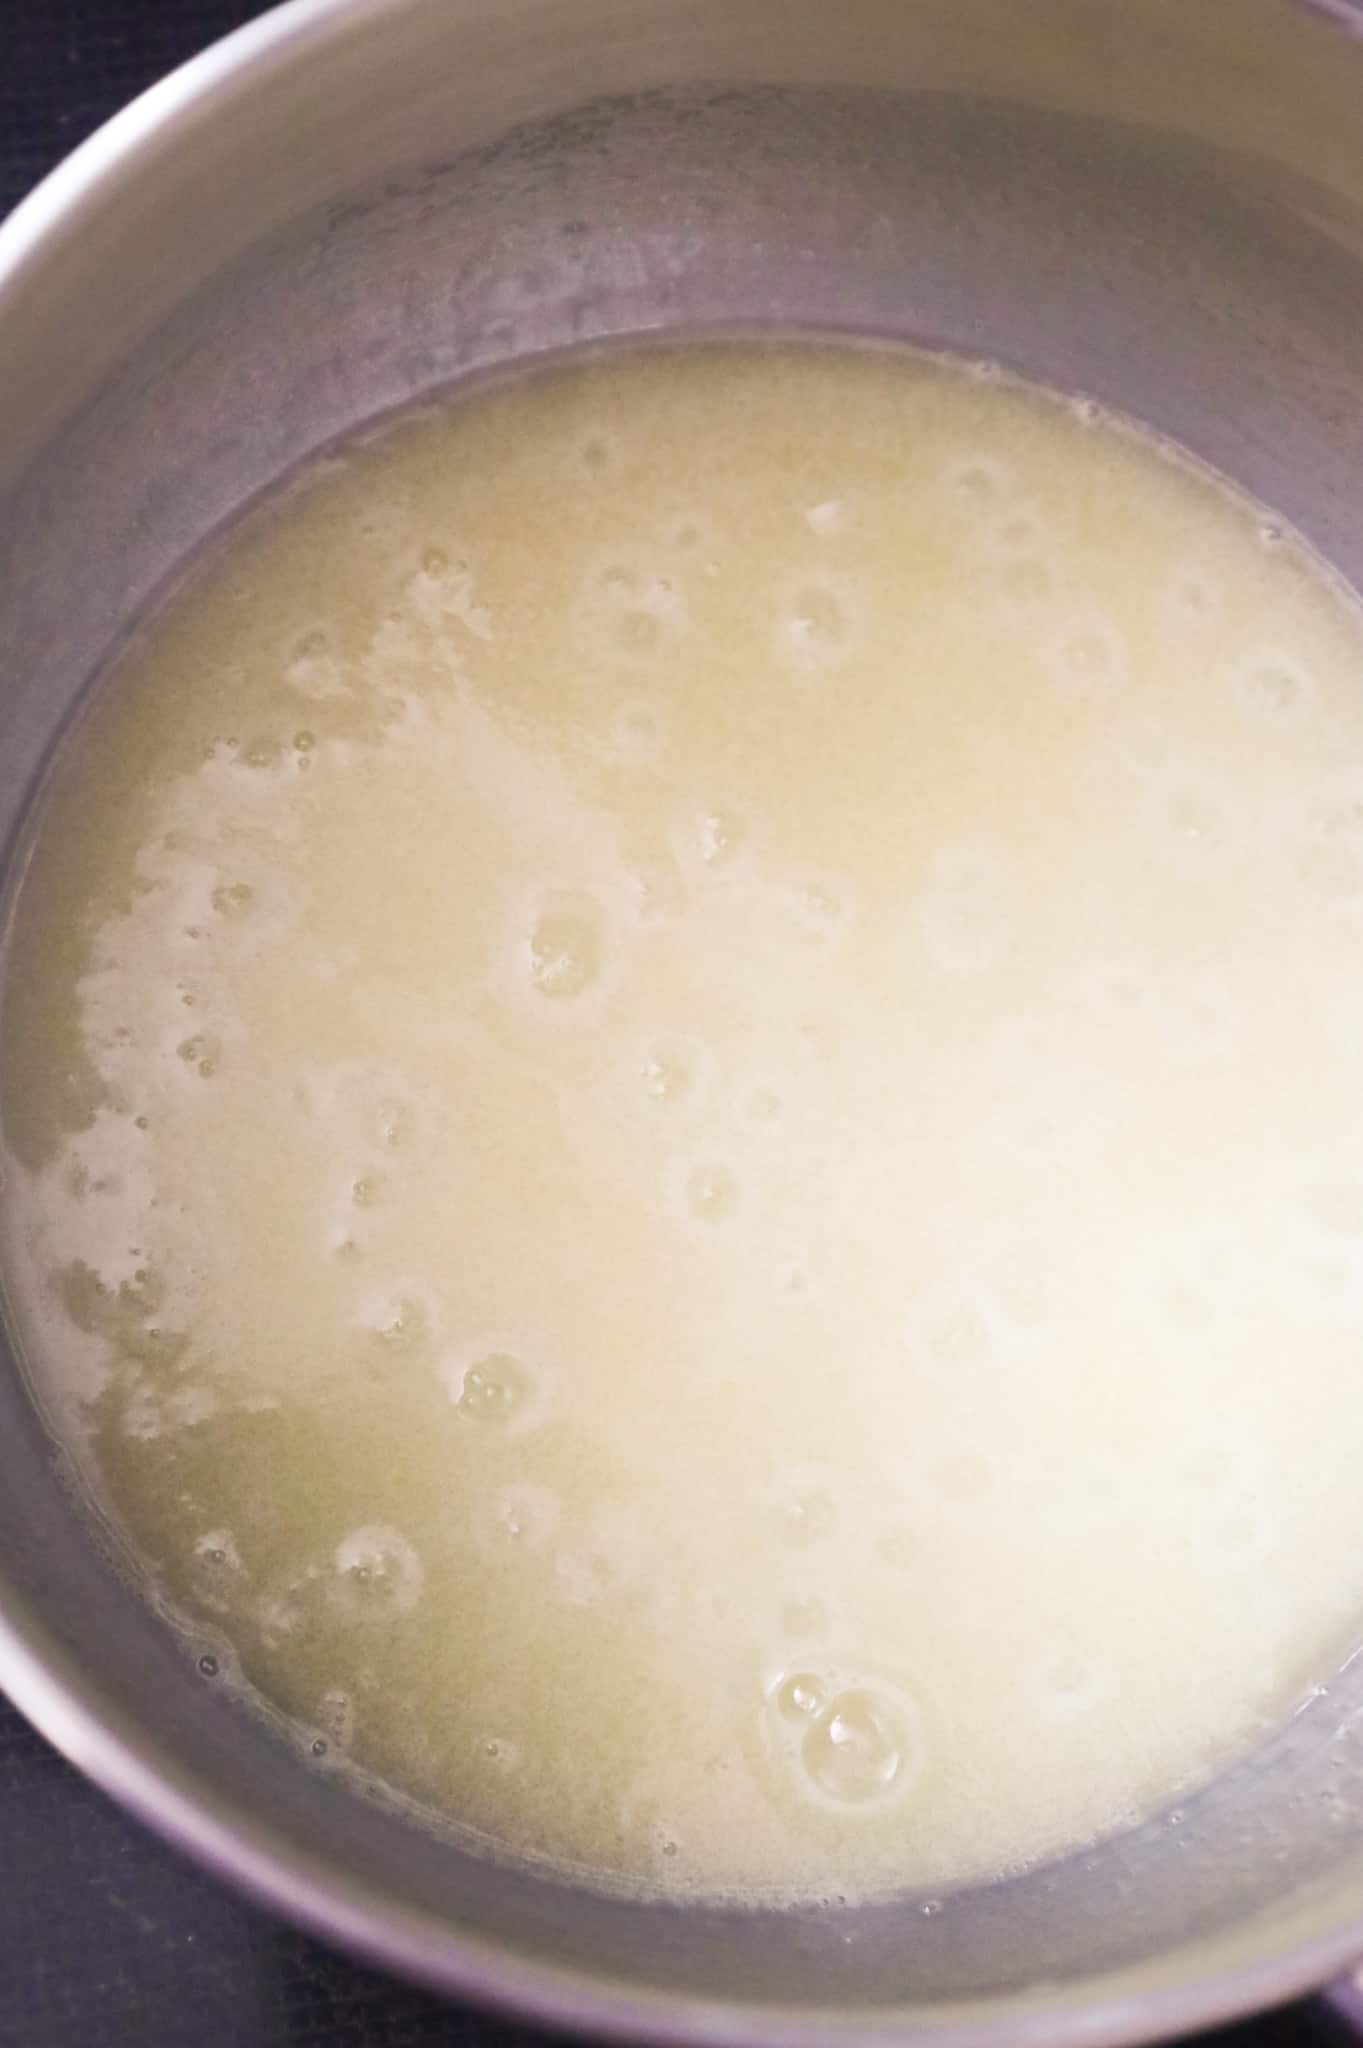 butter, sugar and cream mixture coming to a boil in a saucepan